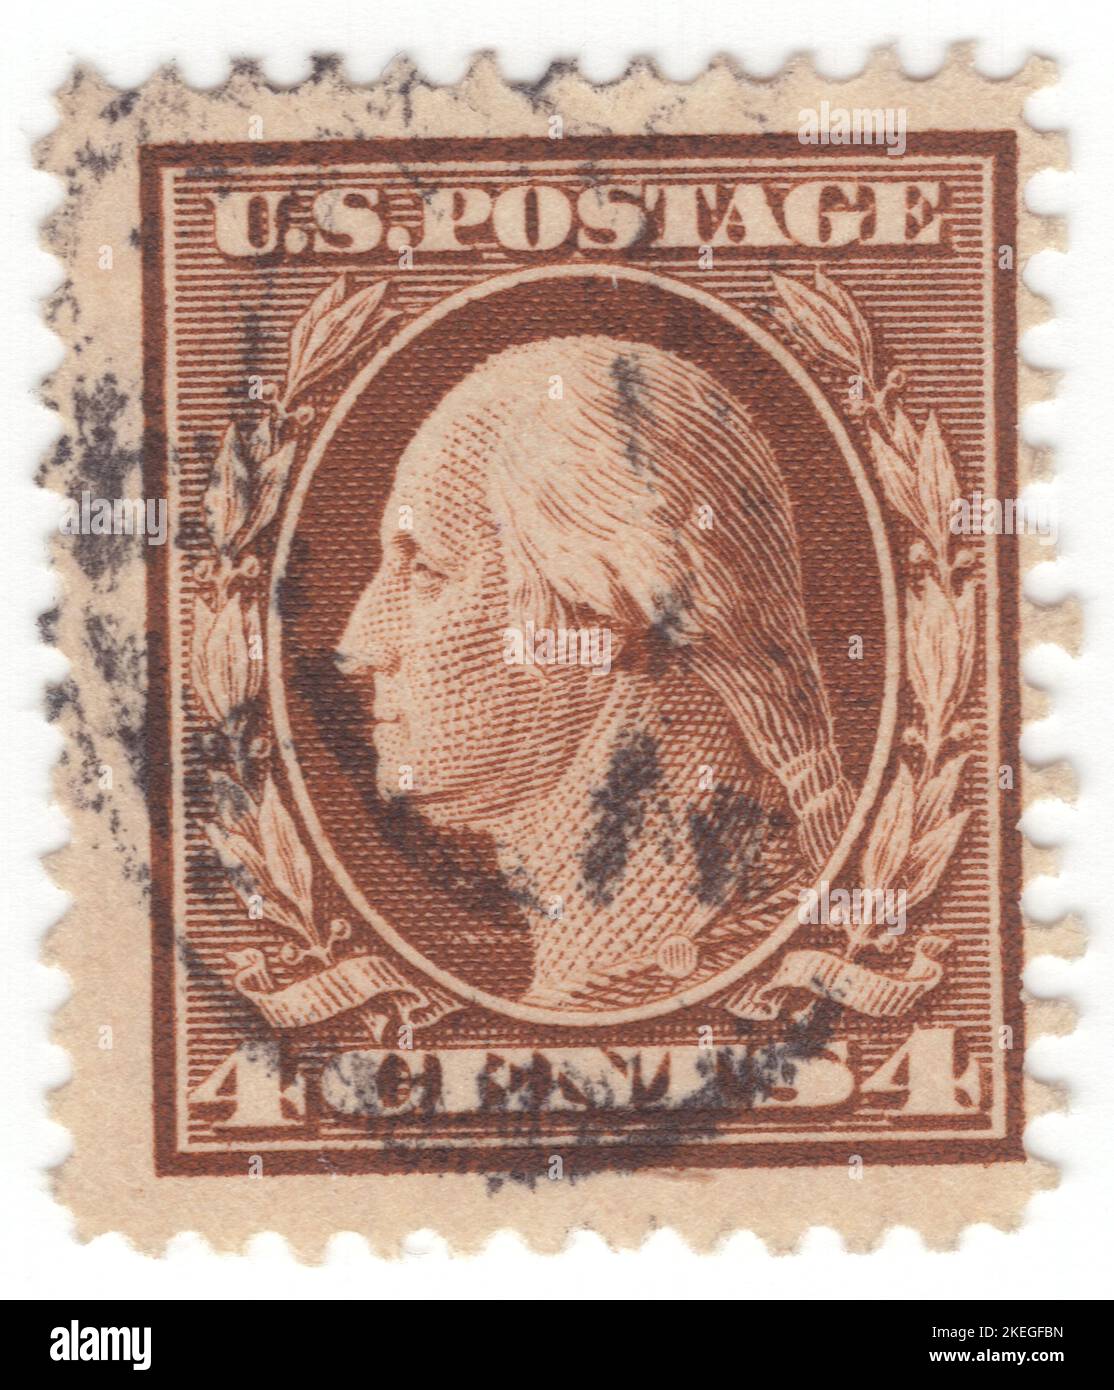 USA - 1911: An 4 cents brown postage stamp depicting portrait of George Washington. American military officer, statesman, and Founding Father who served as the first president of the United States from 1789 to 1797. Appointed by the Continental Congress as commander of the Continental Army, Washington led the Patriot forces to victory in the American Revolutionary War and served as the president of the Constitutional Convention of 1787, which created the Constitution of the United States and the American federal government. Washington has been called the 'Father of his Country' Stock Photo